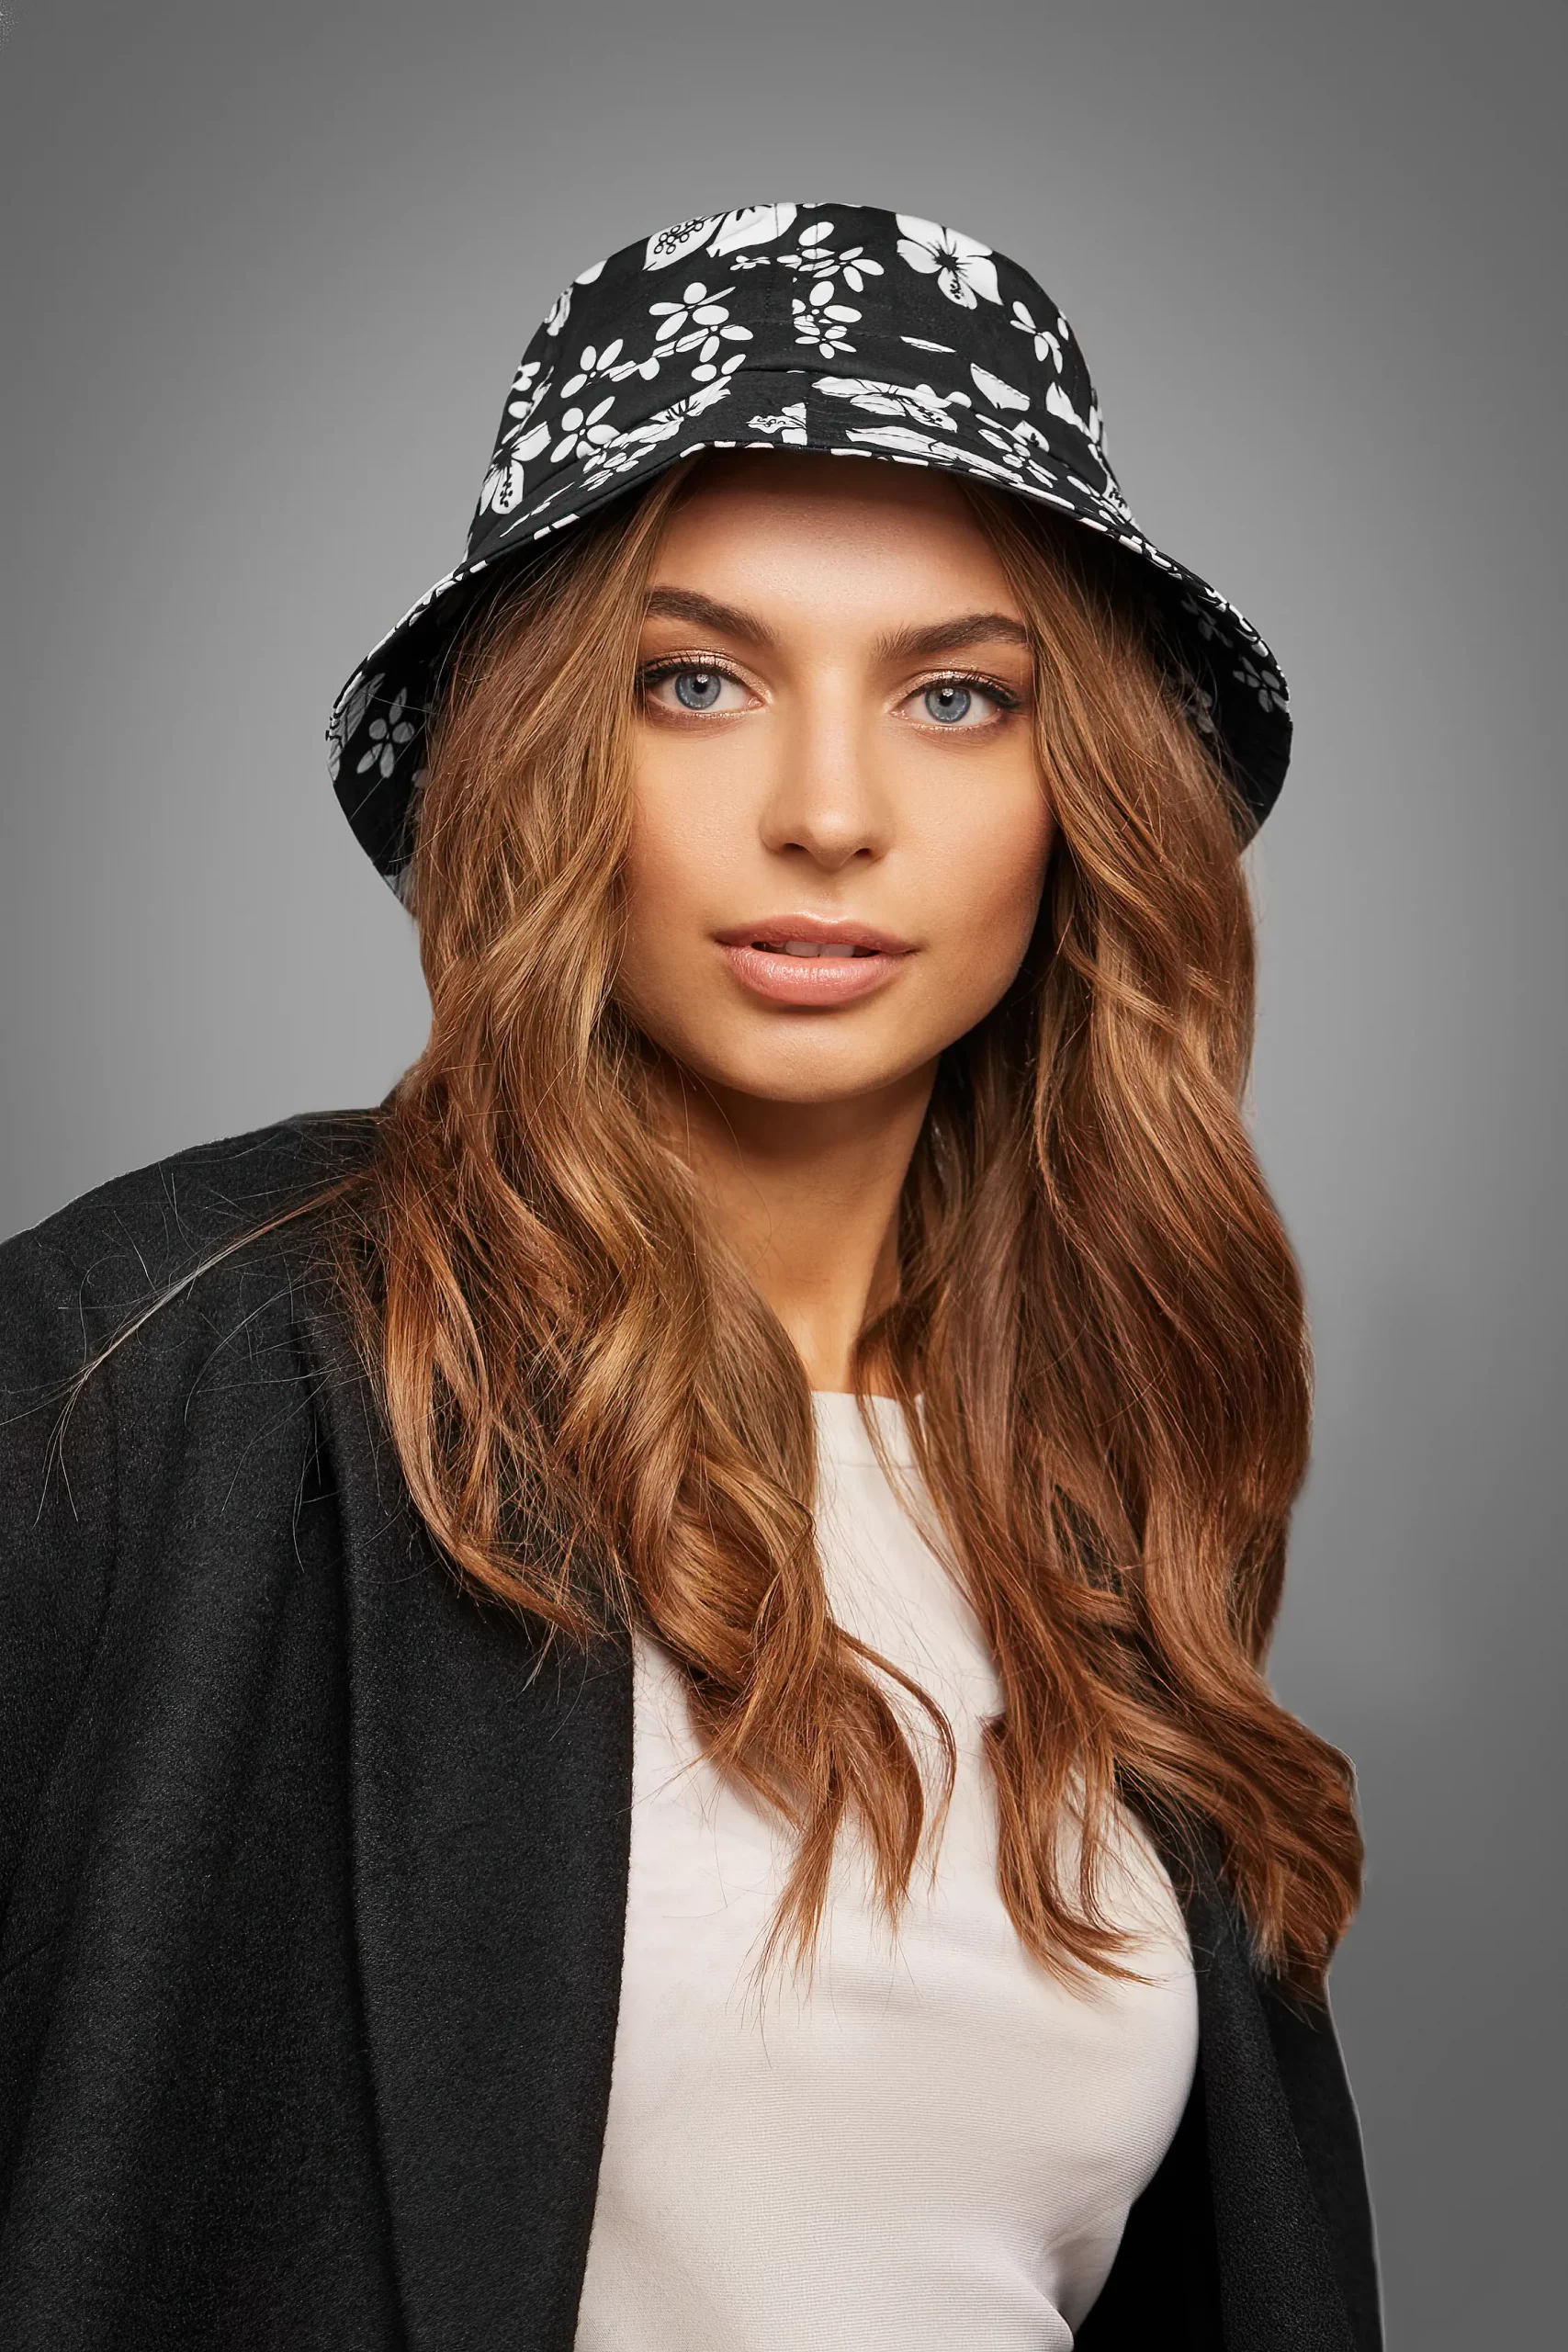 Medium close-up shot of charming blonde lady with wavy hair dressed in a beige top, a black jacket and a black bucket hat with a floral print